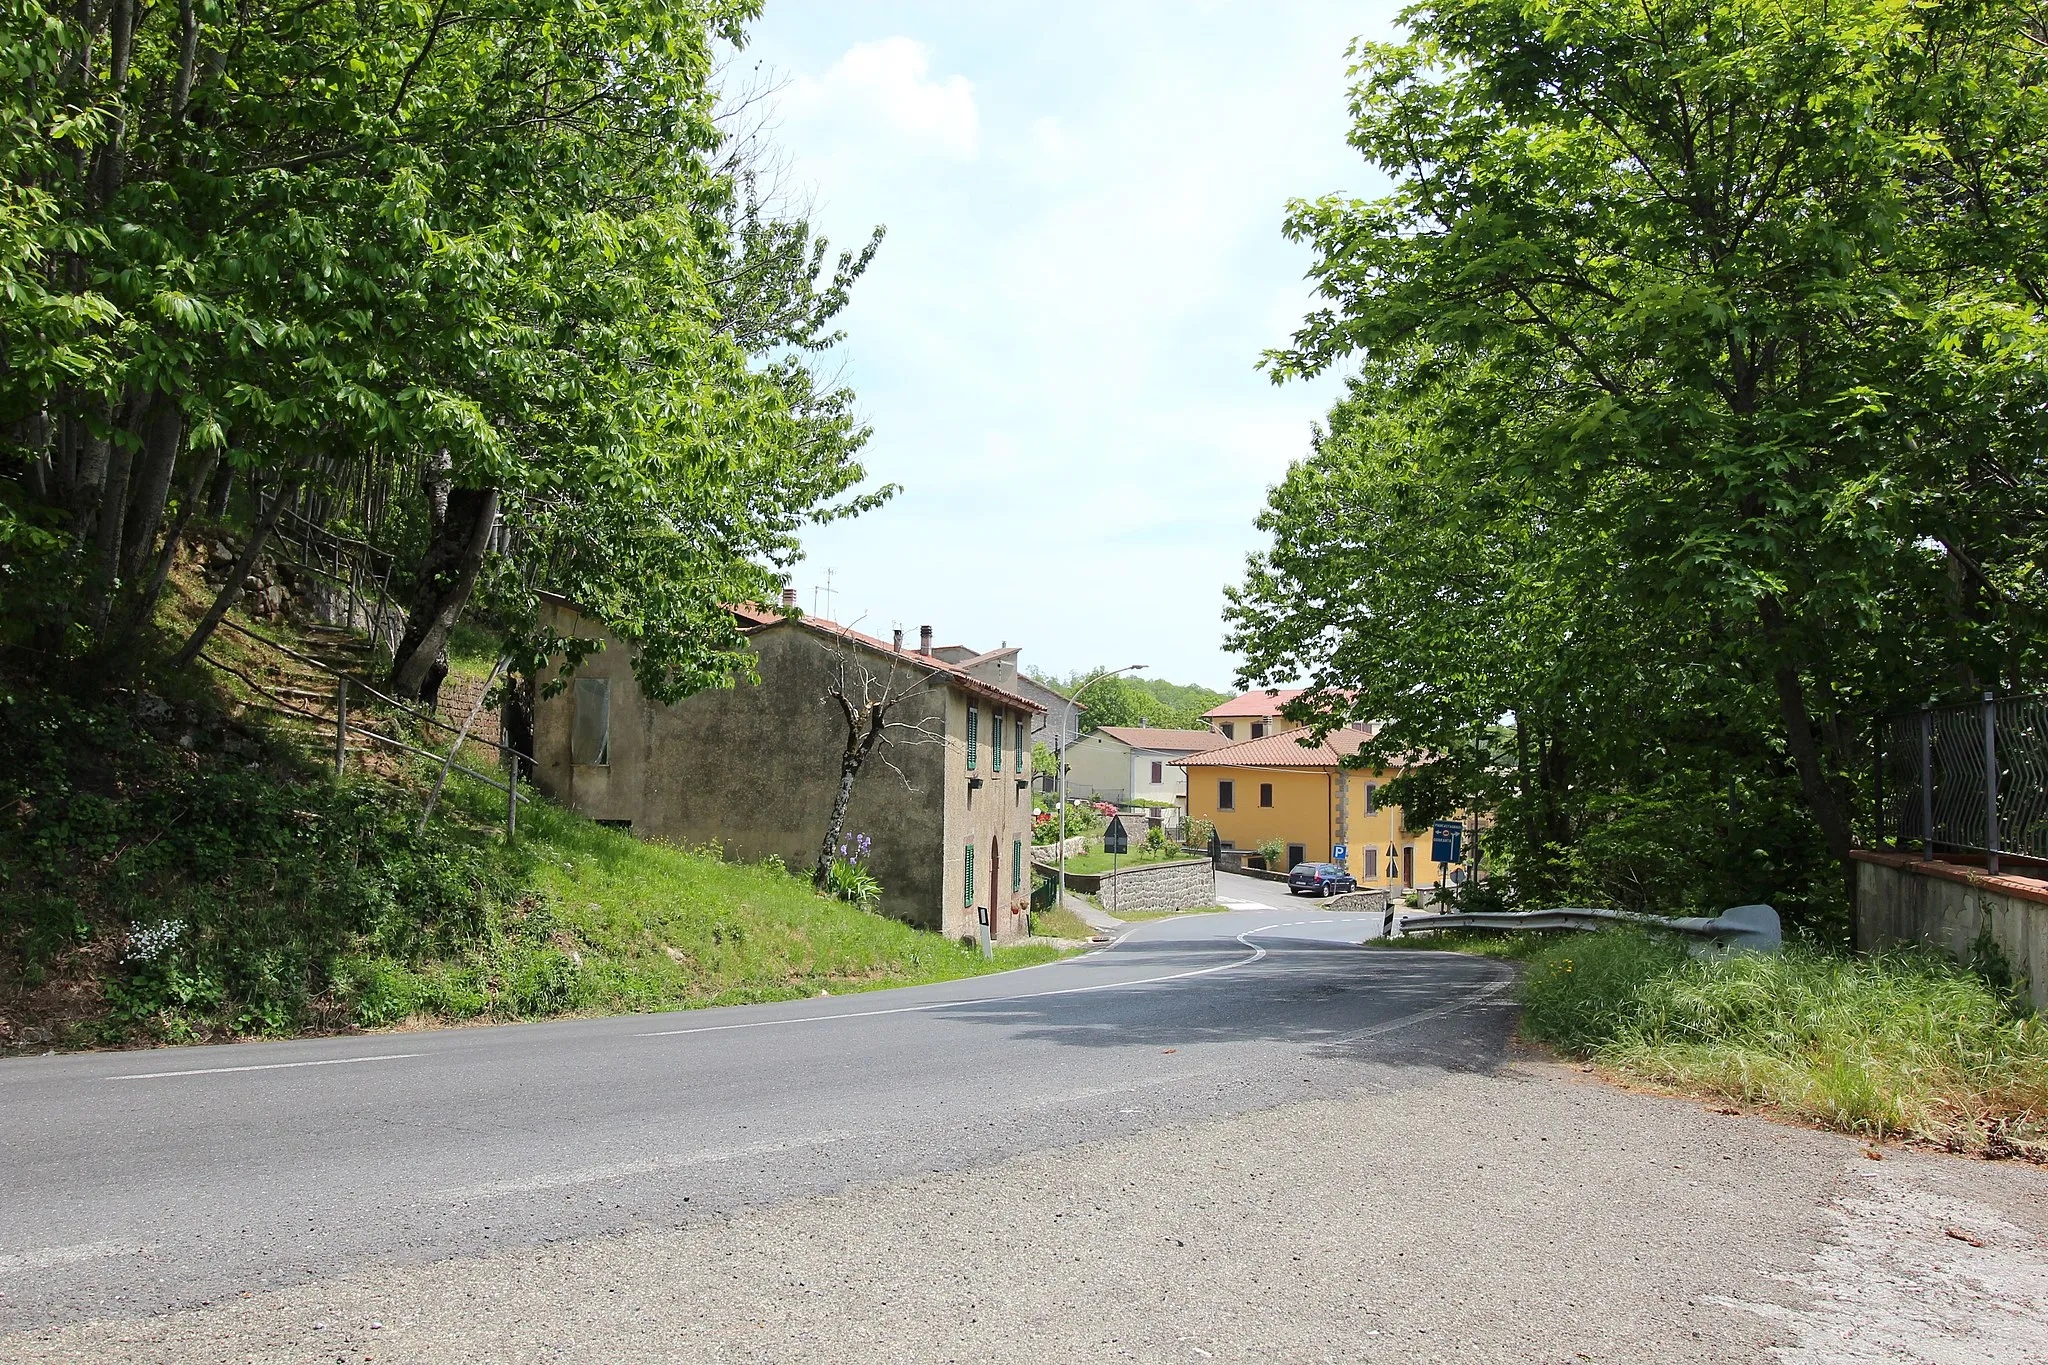 Photo showing: Saragiolo, village in the territory of Piancastagnaio, Province of Siena, Tuscany, Italy